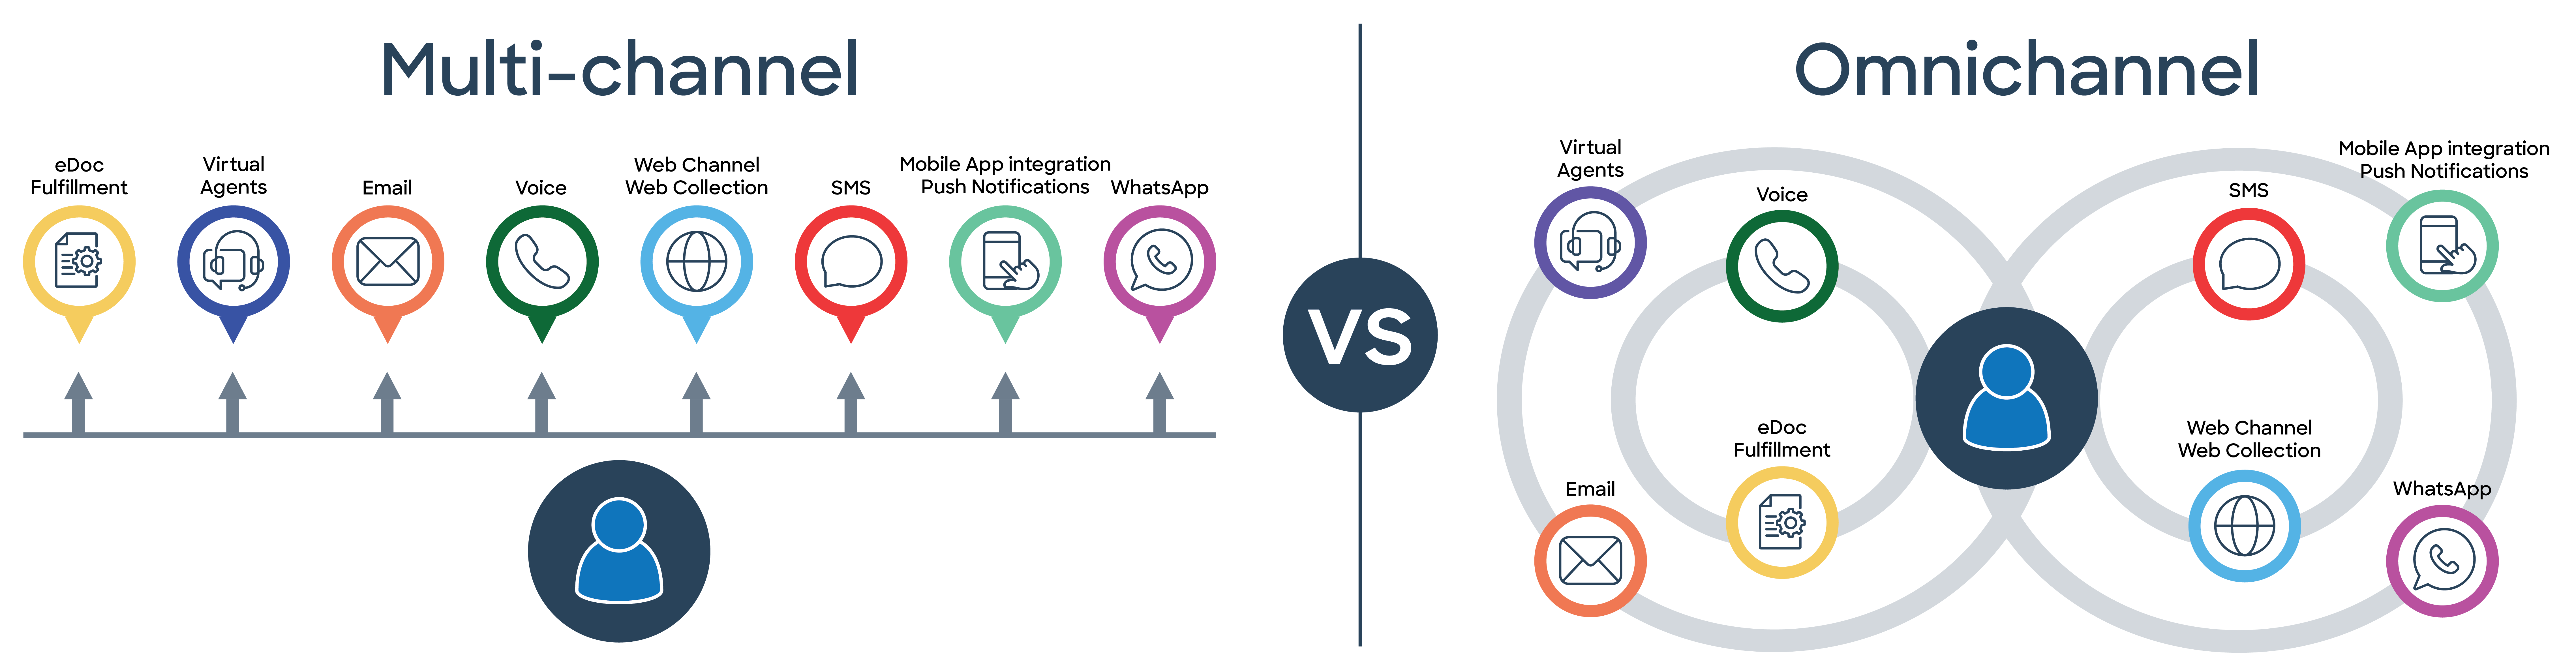 Omnichannel vs Multichannel: What is the Difference?